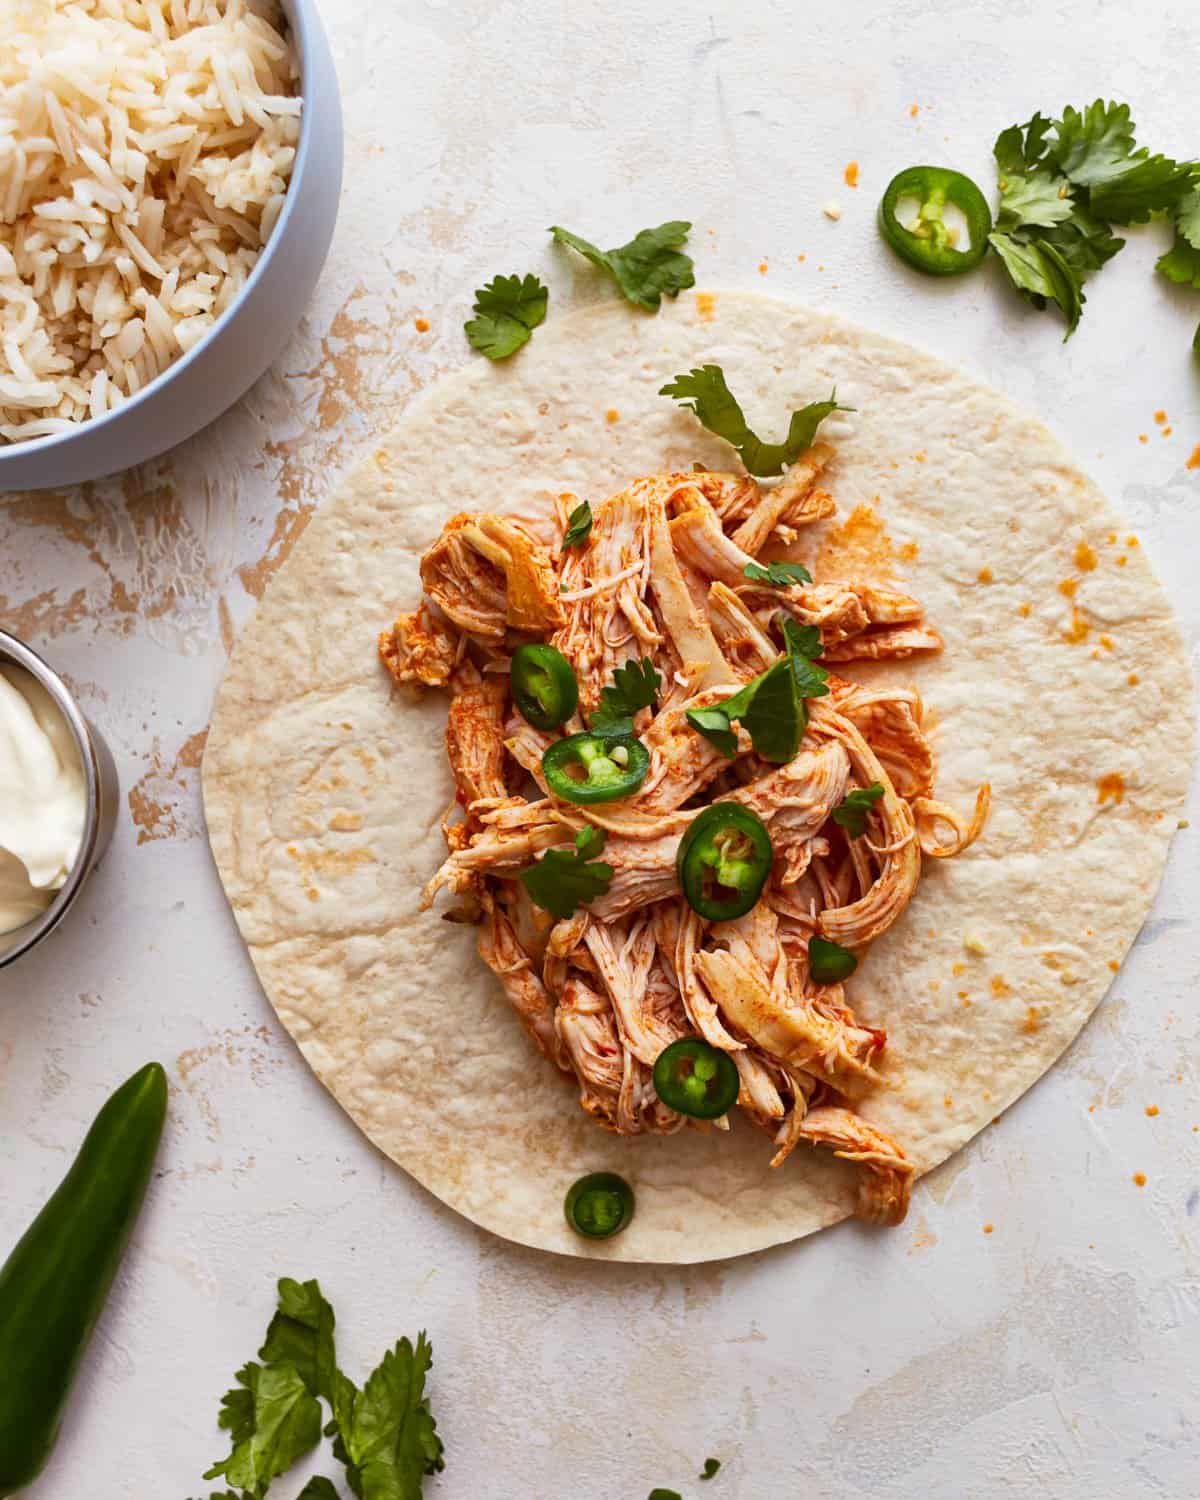 Instant pot shredded chicken spread onto a tortilla with sliced jalapeños, to make tacos.